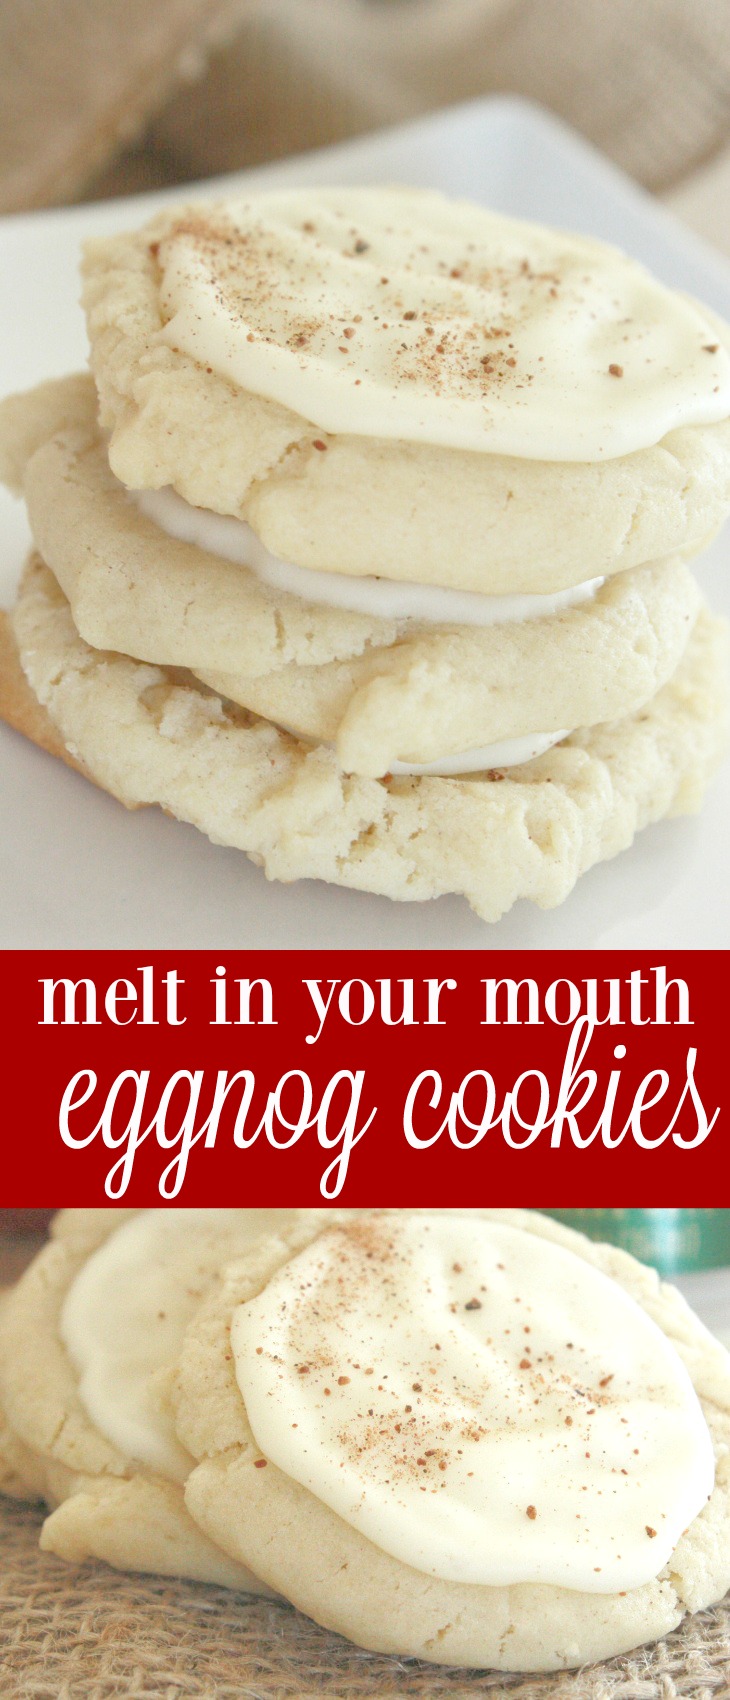 Melt-In-Your-Mouth Eggnog Cookies - One of my favorite holiday cookies!! These moist cookies are awesome for a cookie exchange or the Christmas cookie swap!